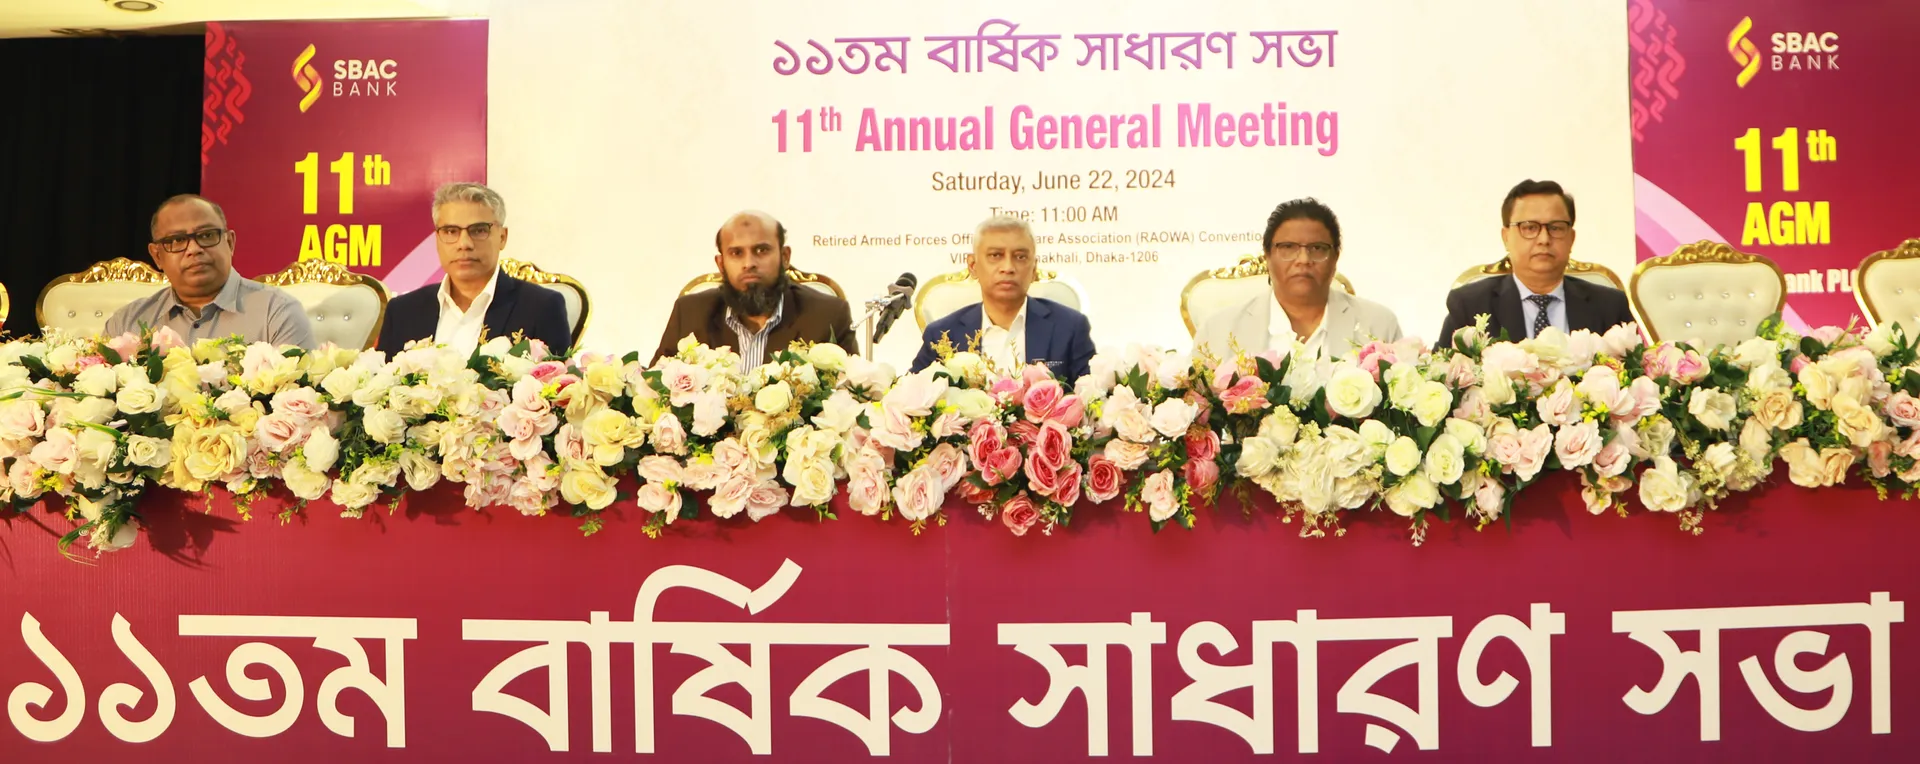 The 11th Annual General Meeting (AGM) of SBAC Bank PLC. held on June 22, 2024